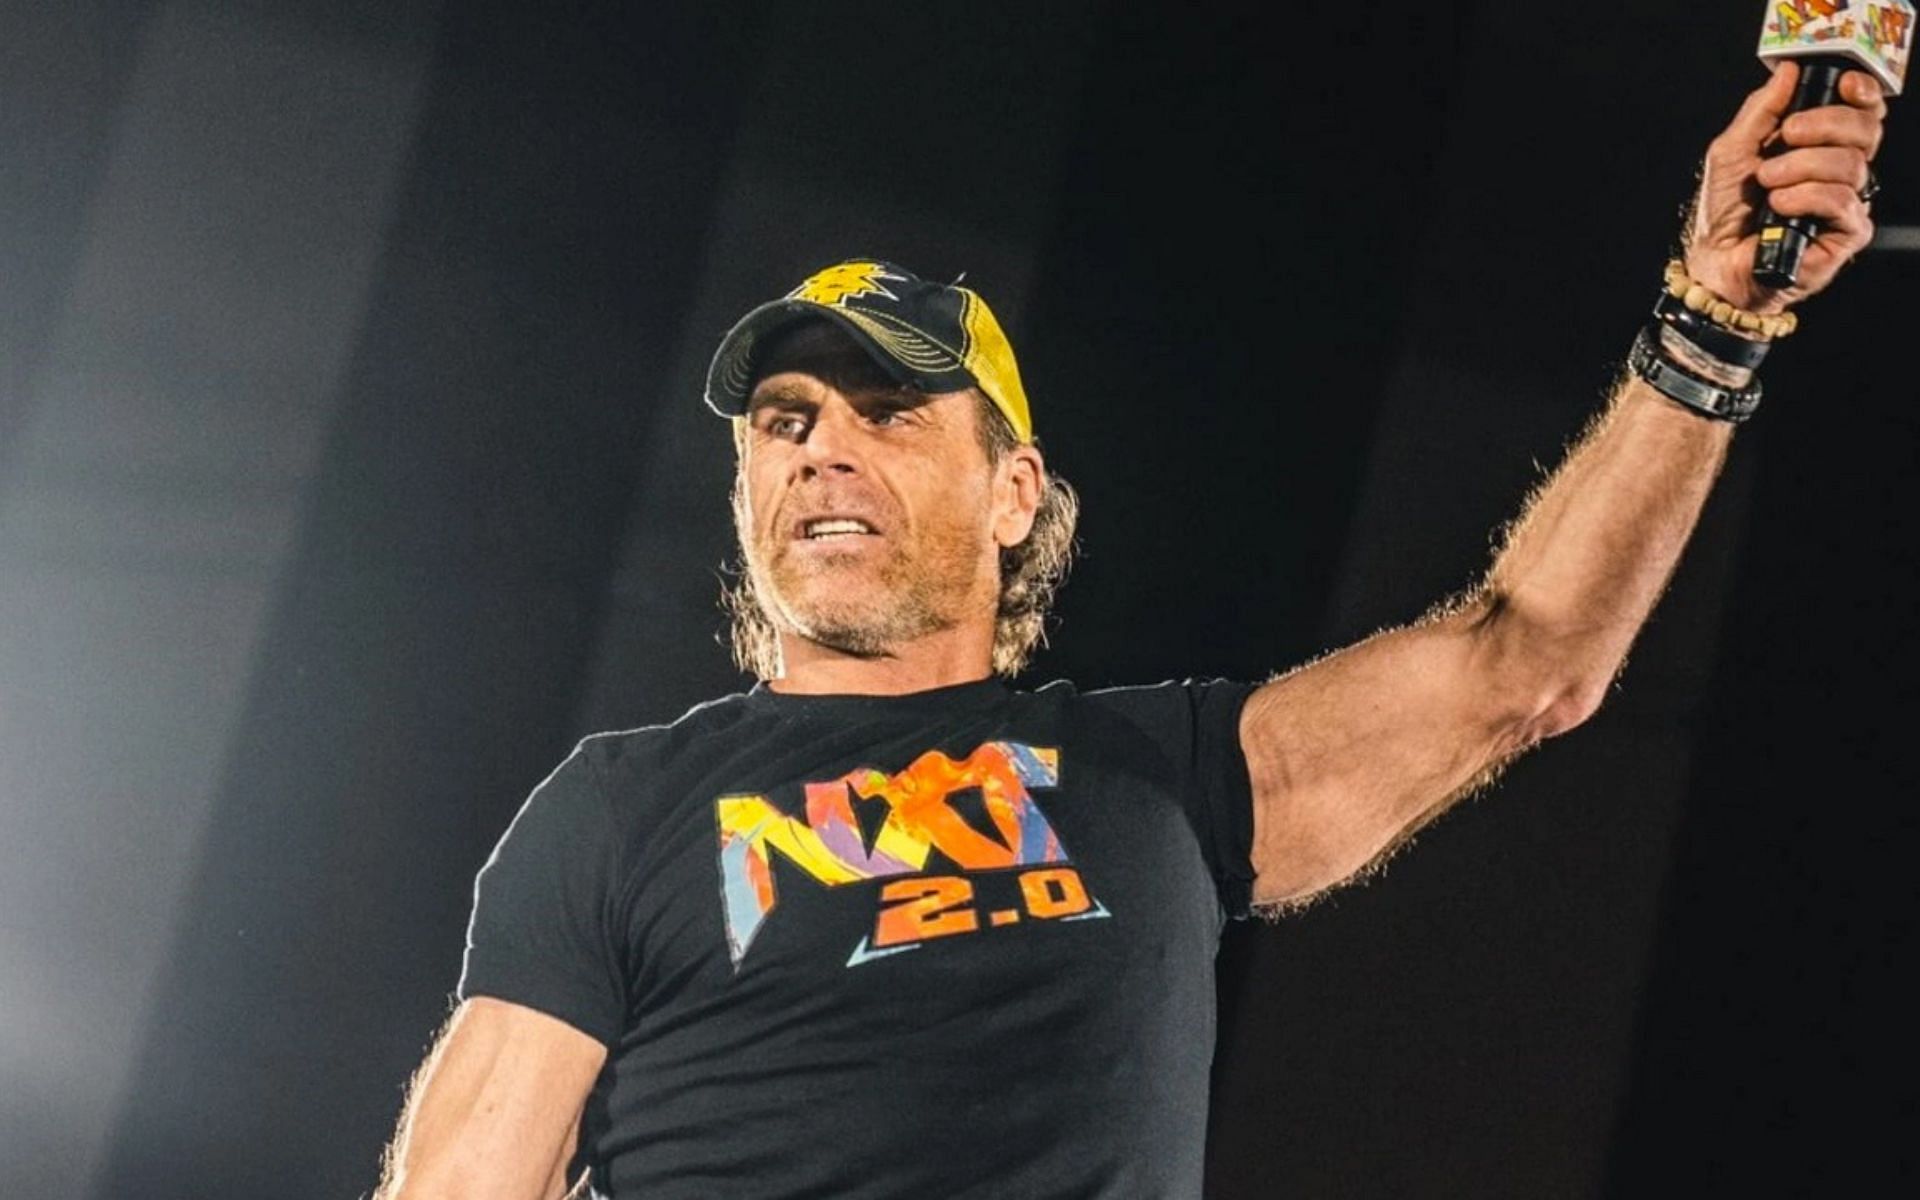 Shawn Michaels is a former World Champion!